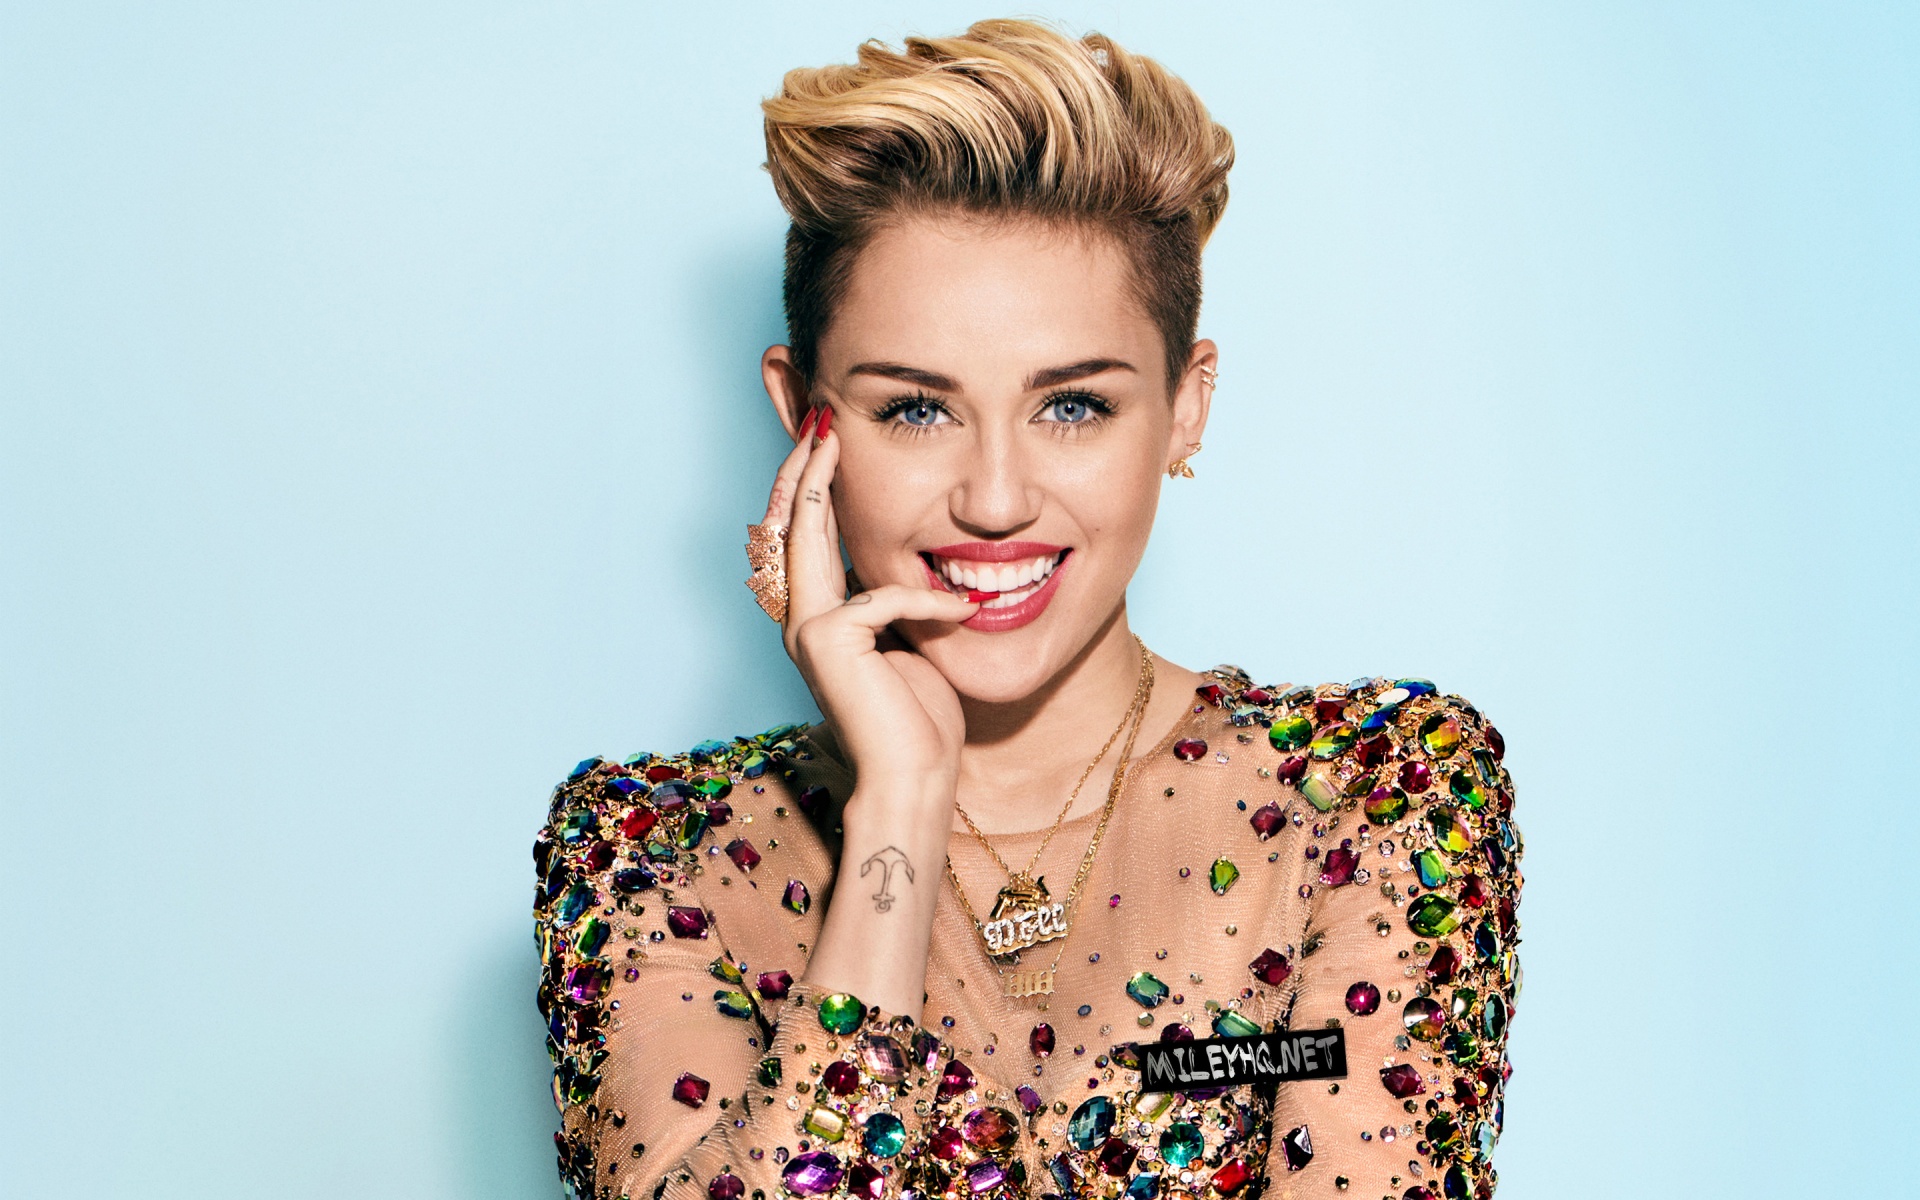 miley cyrus wallpapers hd A58